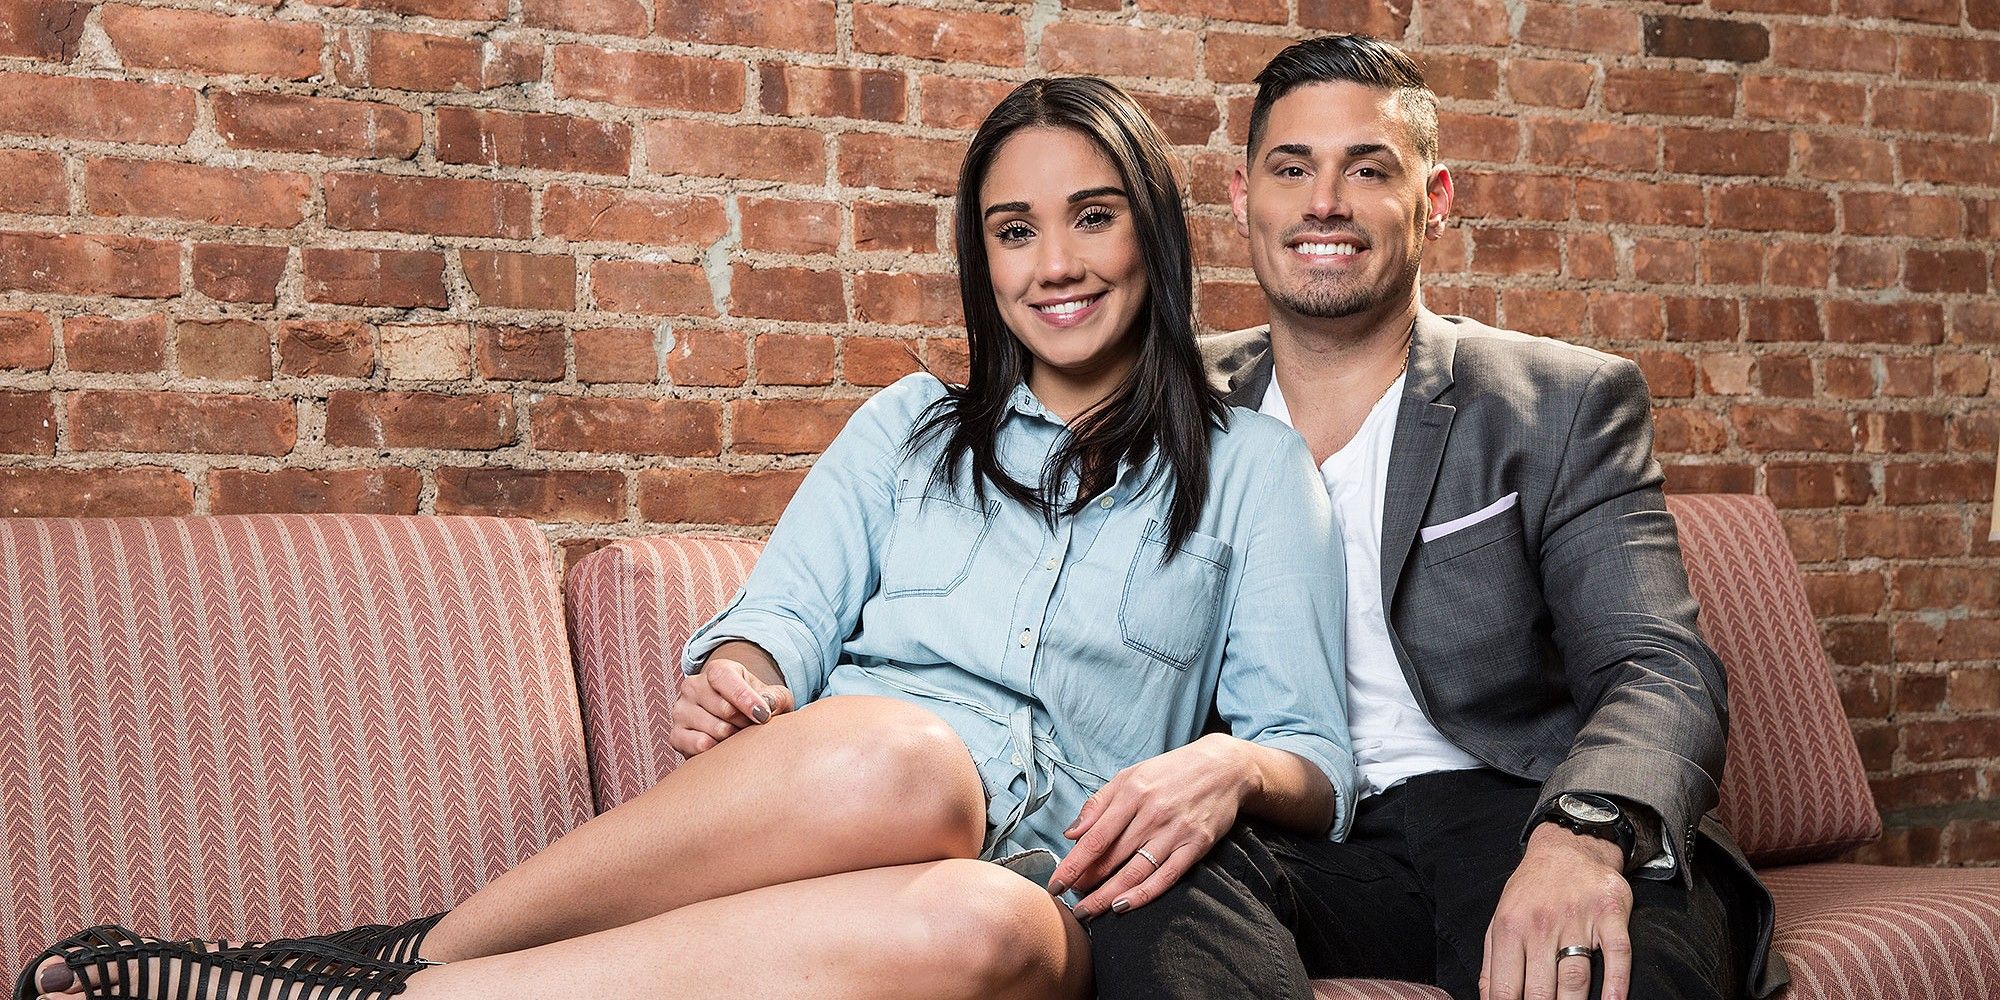 Ryan De Nino Jessica Castro Married At First Sight sitting on couch smiling